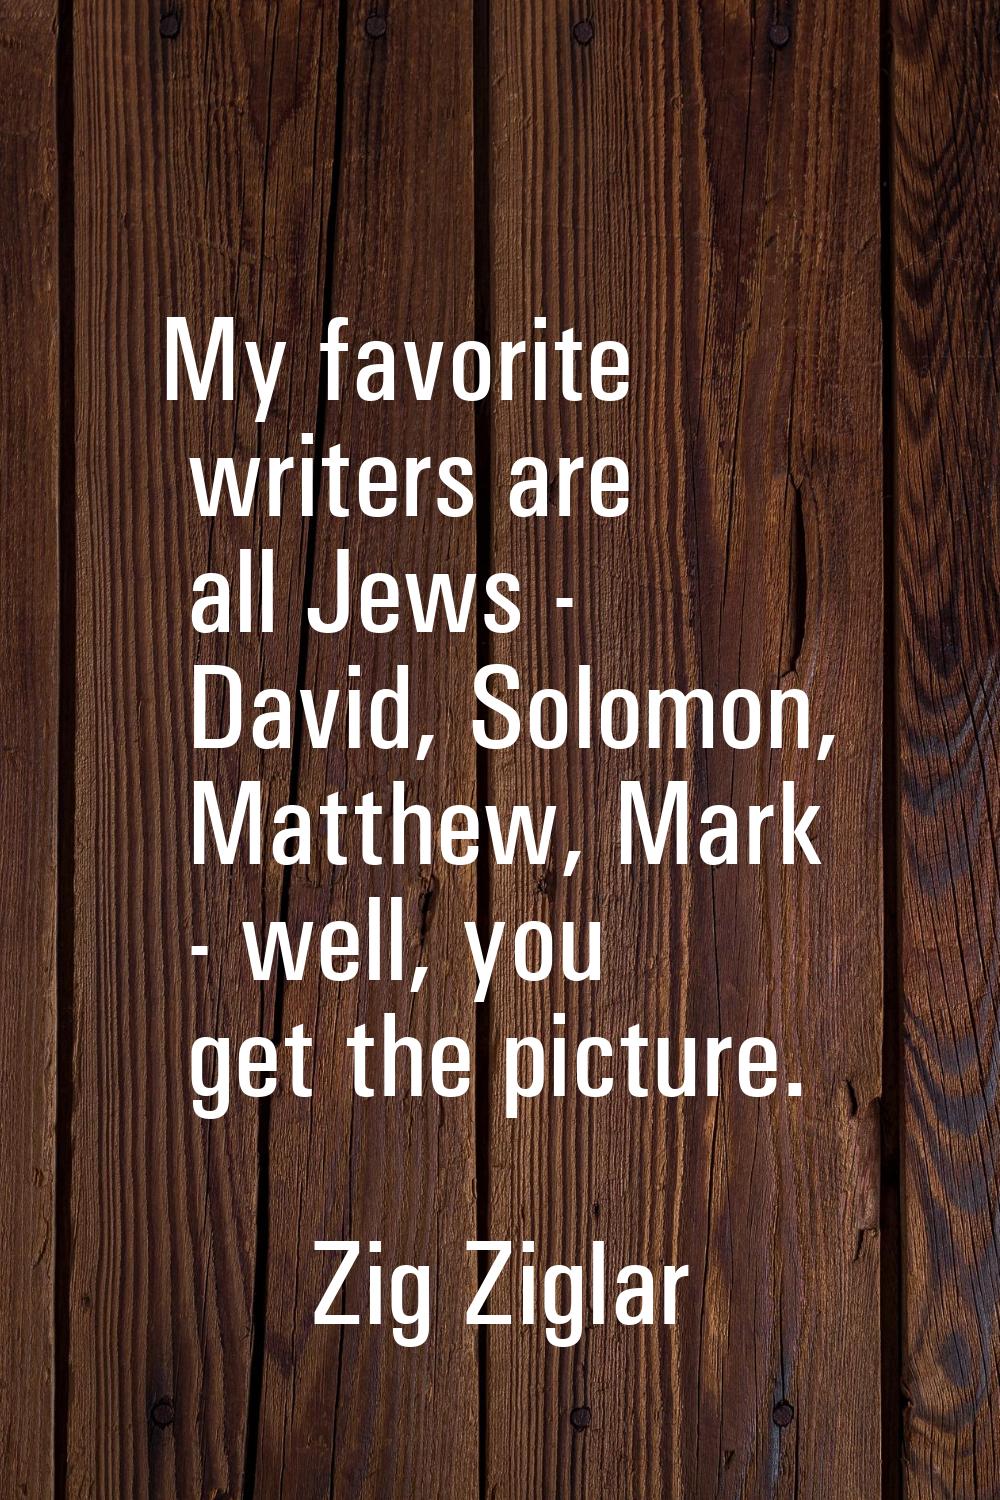 My favorite writers are all Jews - David, Solomon, Matthew, Mark - well, you get the picture.